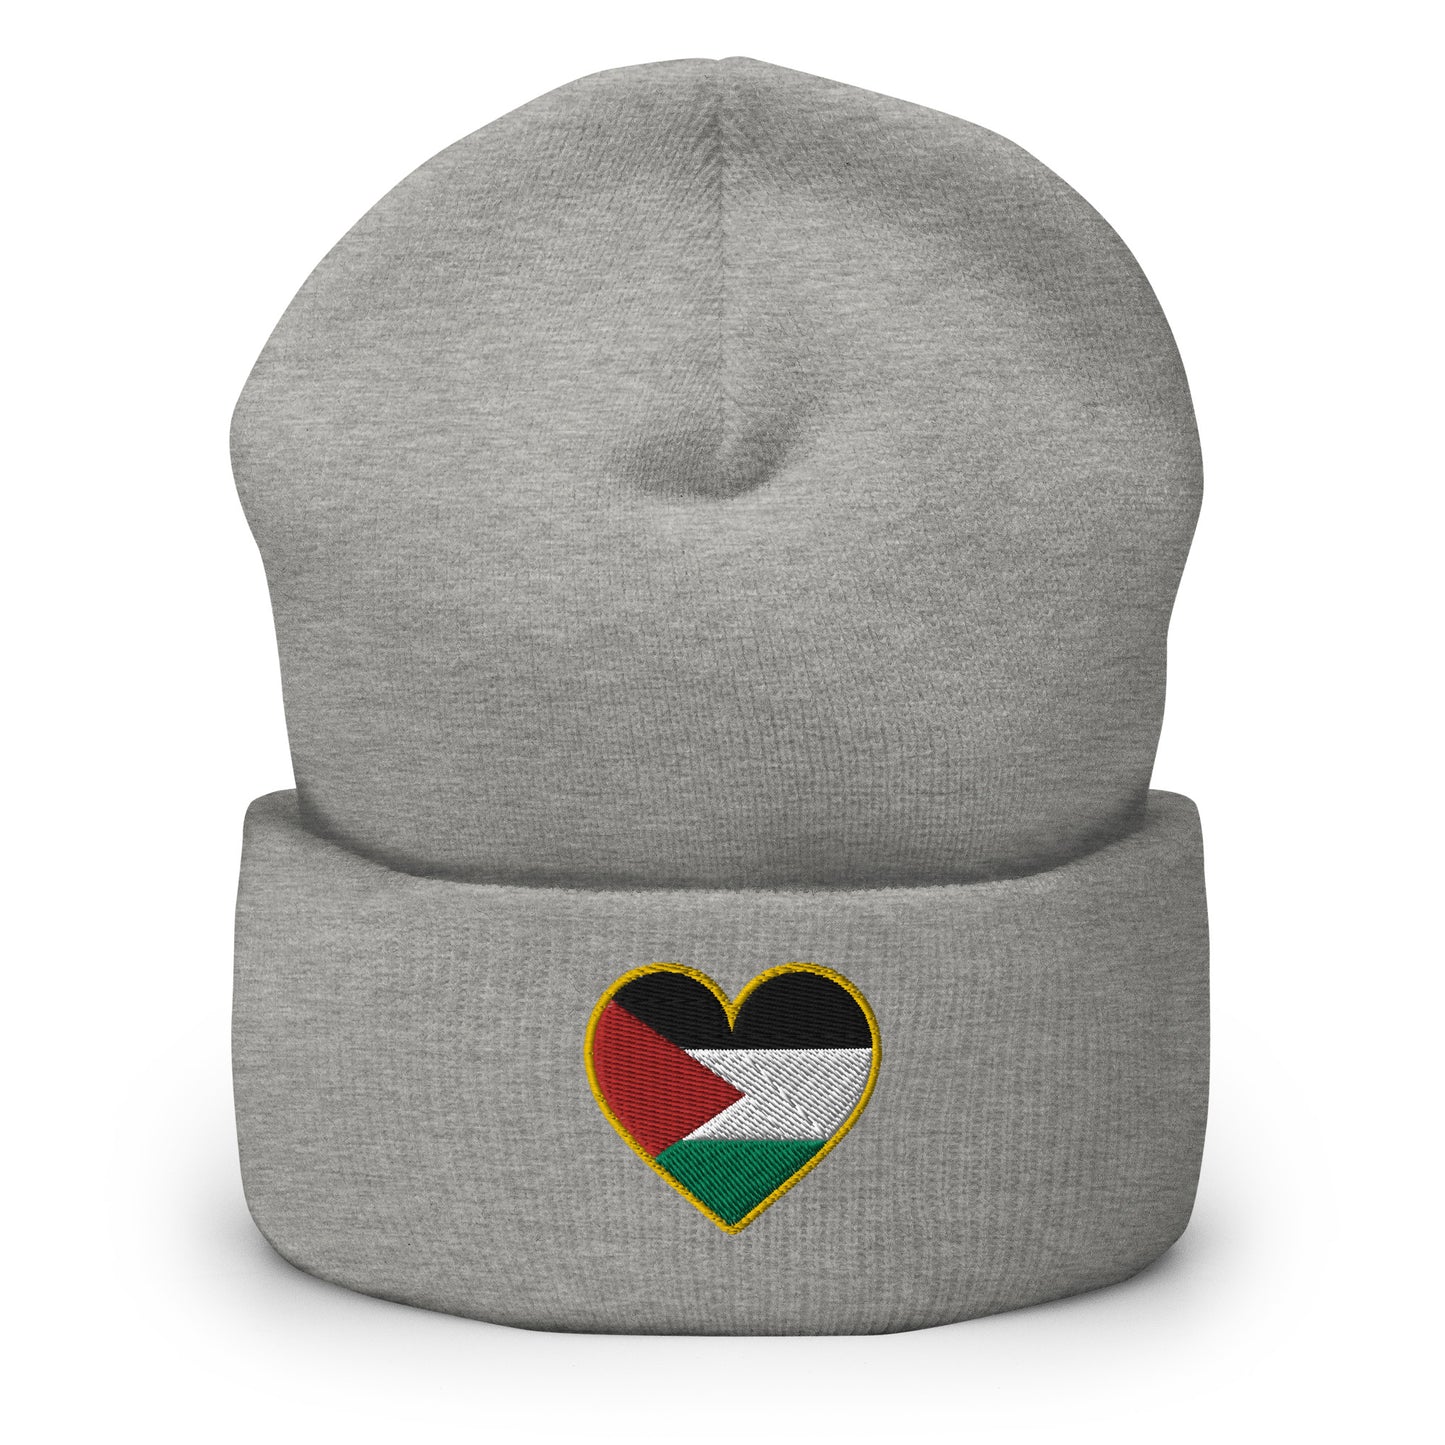 Love Palestine | Cuffed Beanie with Embroidered Emblem